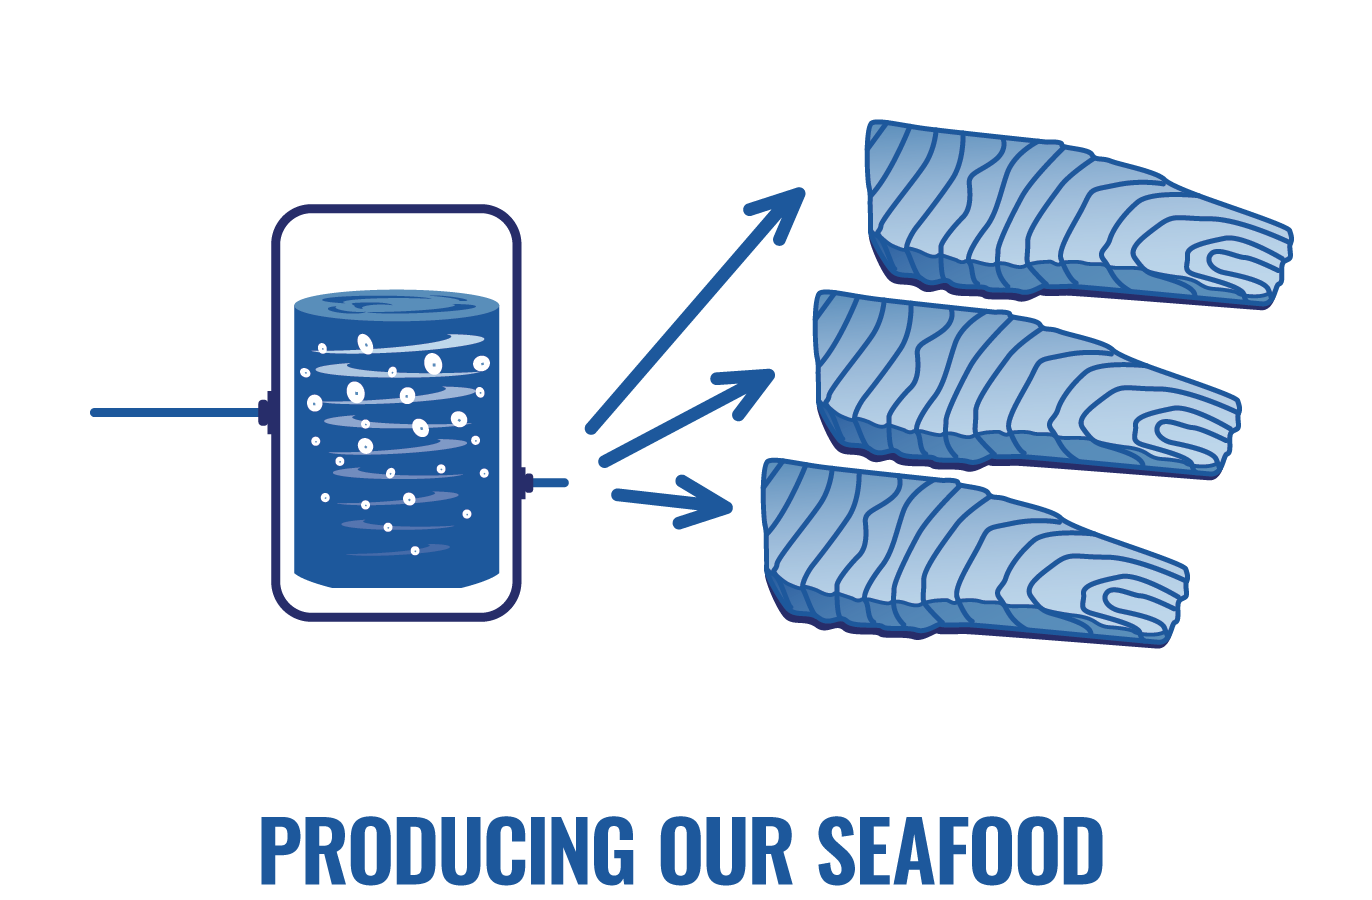 3.	Next, the cells are concentrated and formed into a seafood portion using processes that are utilized in the food industry.